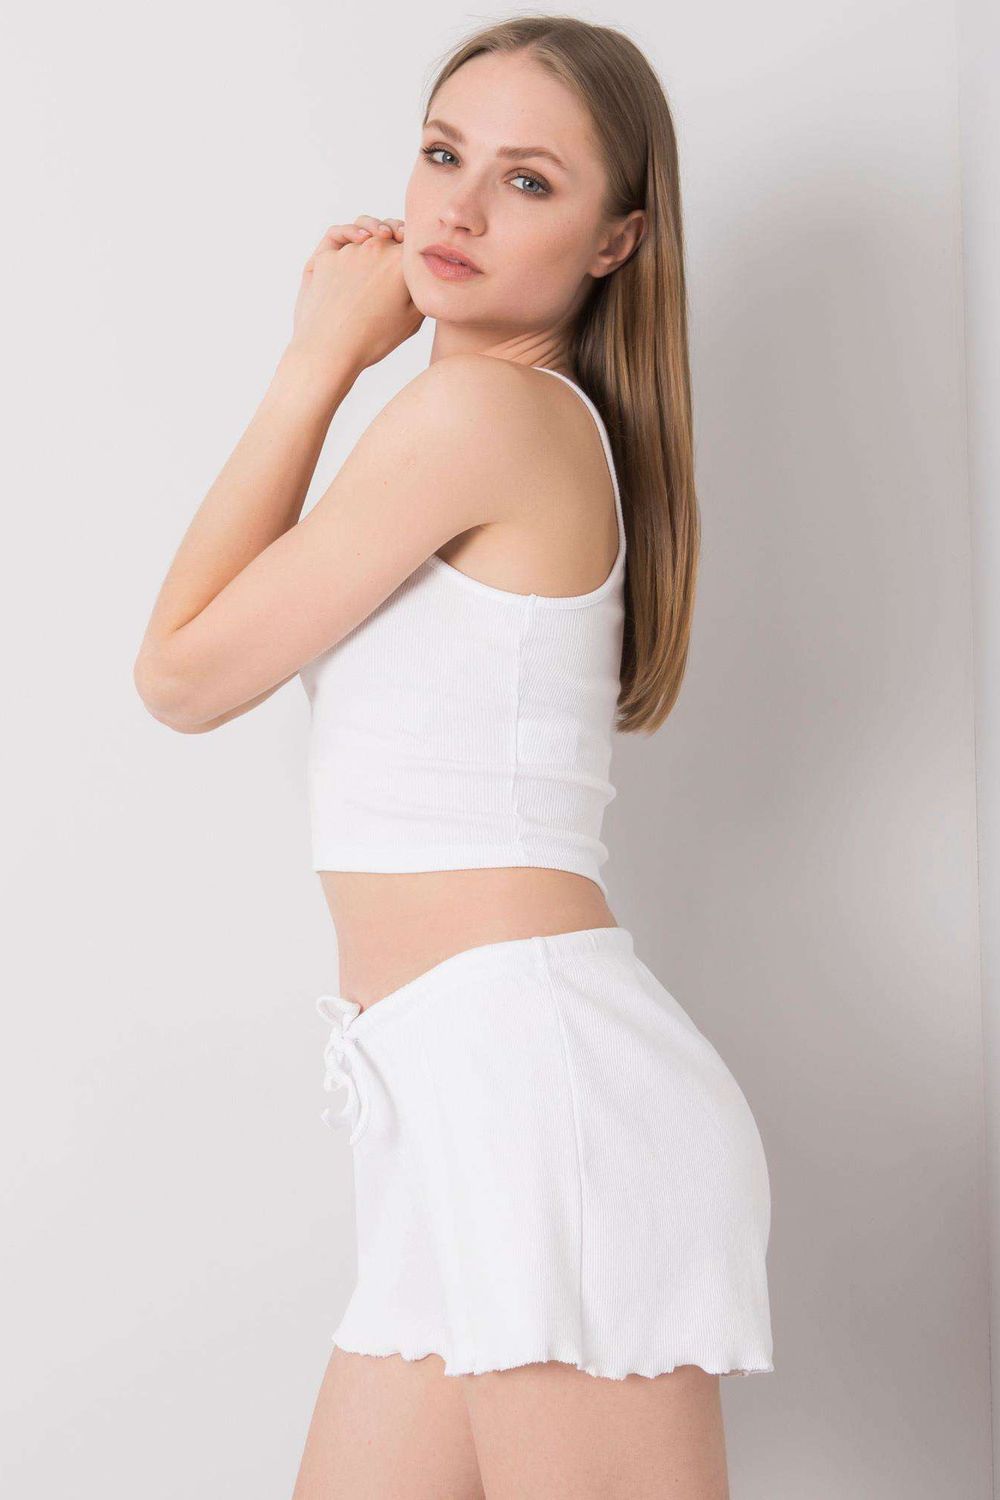 Shorts model 180912 Elsy Style Shorts for Women, Crop Pants